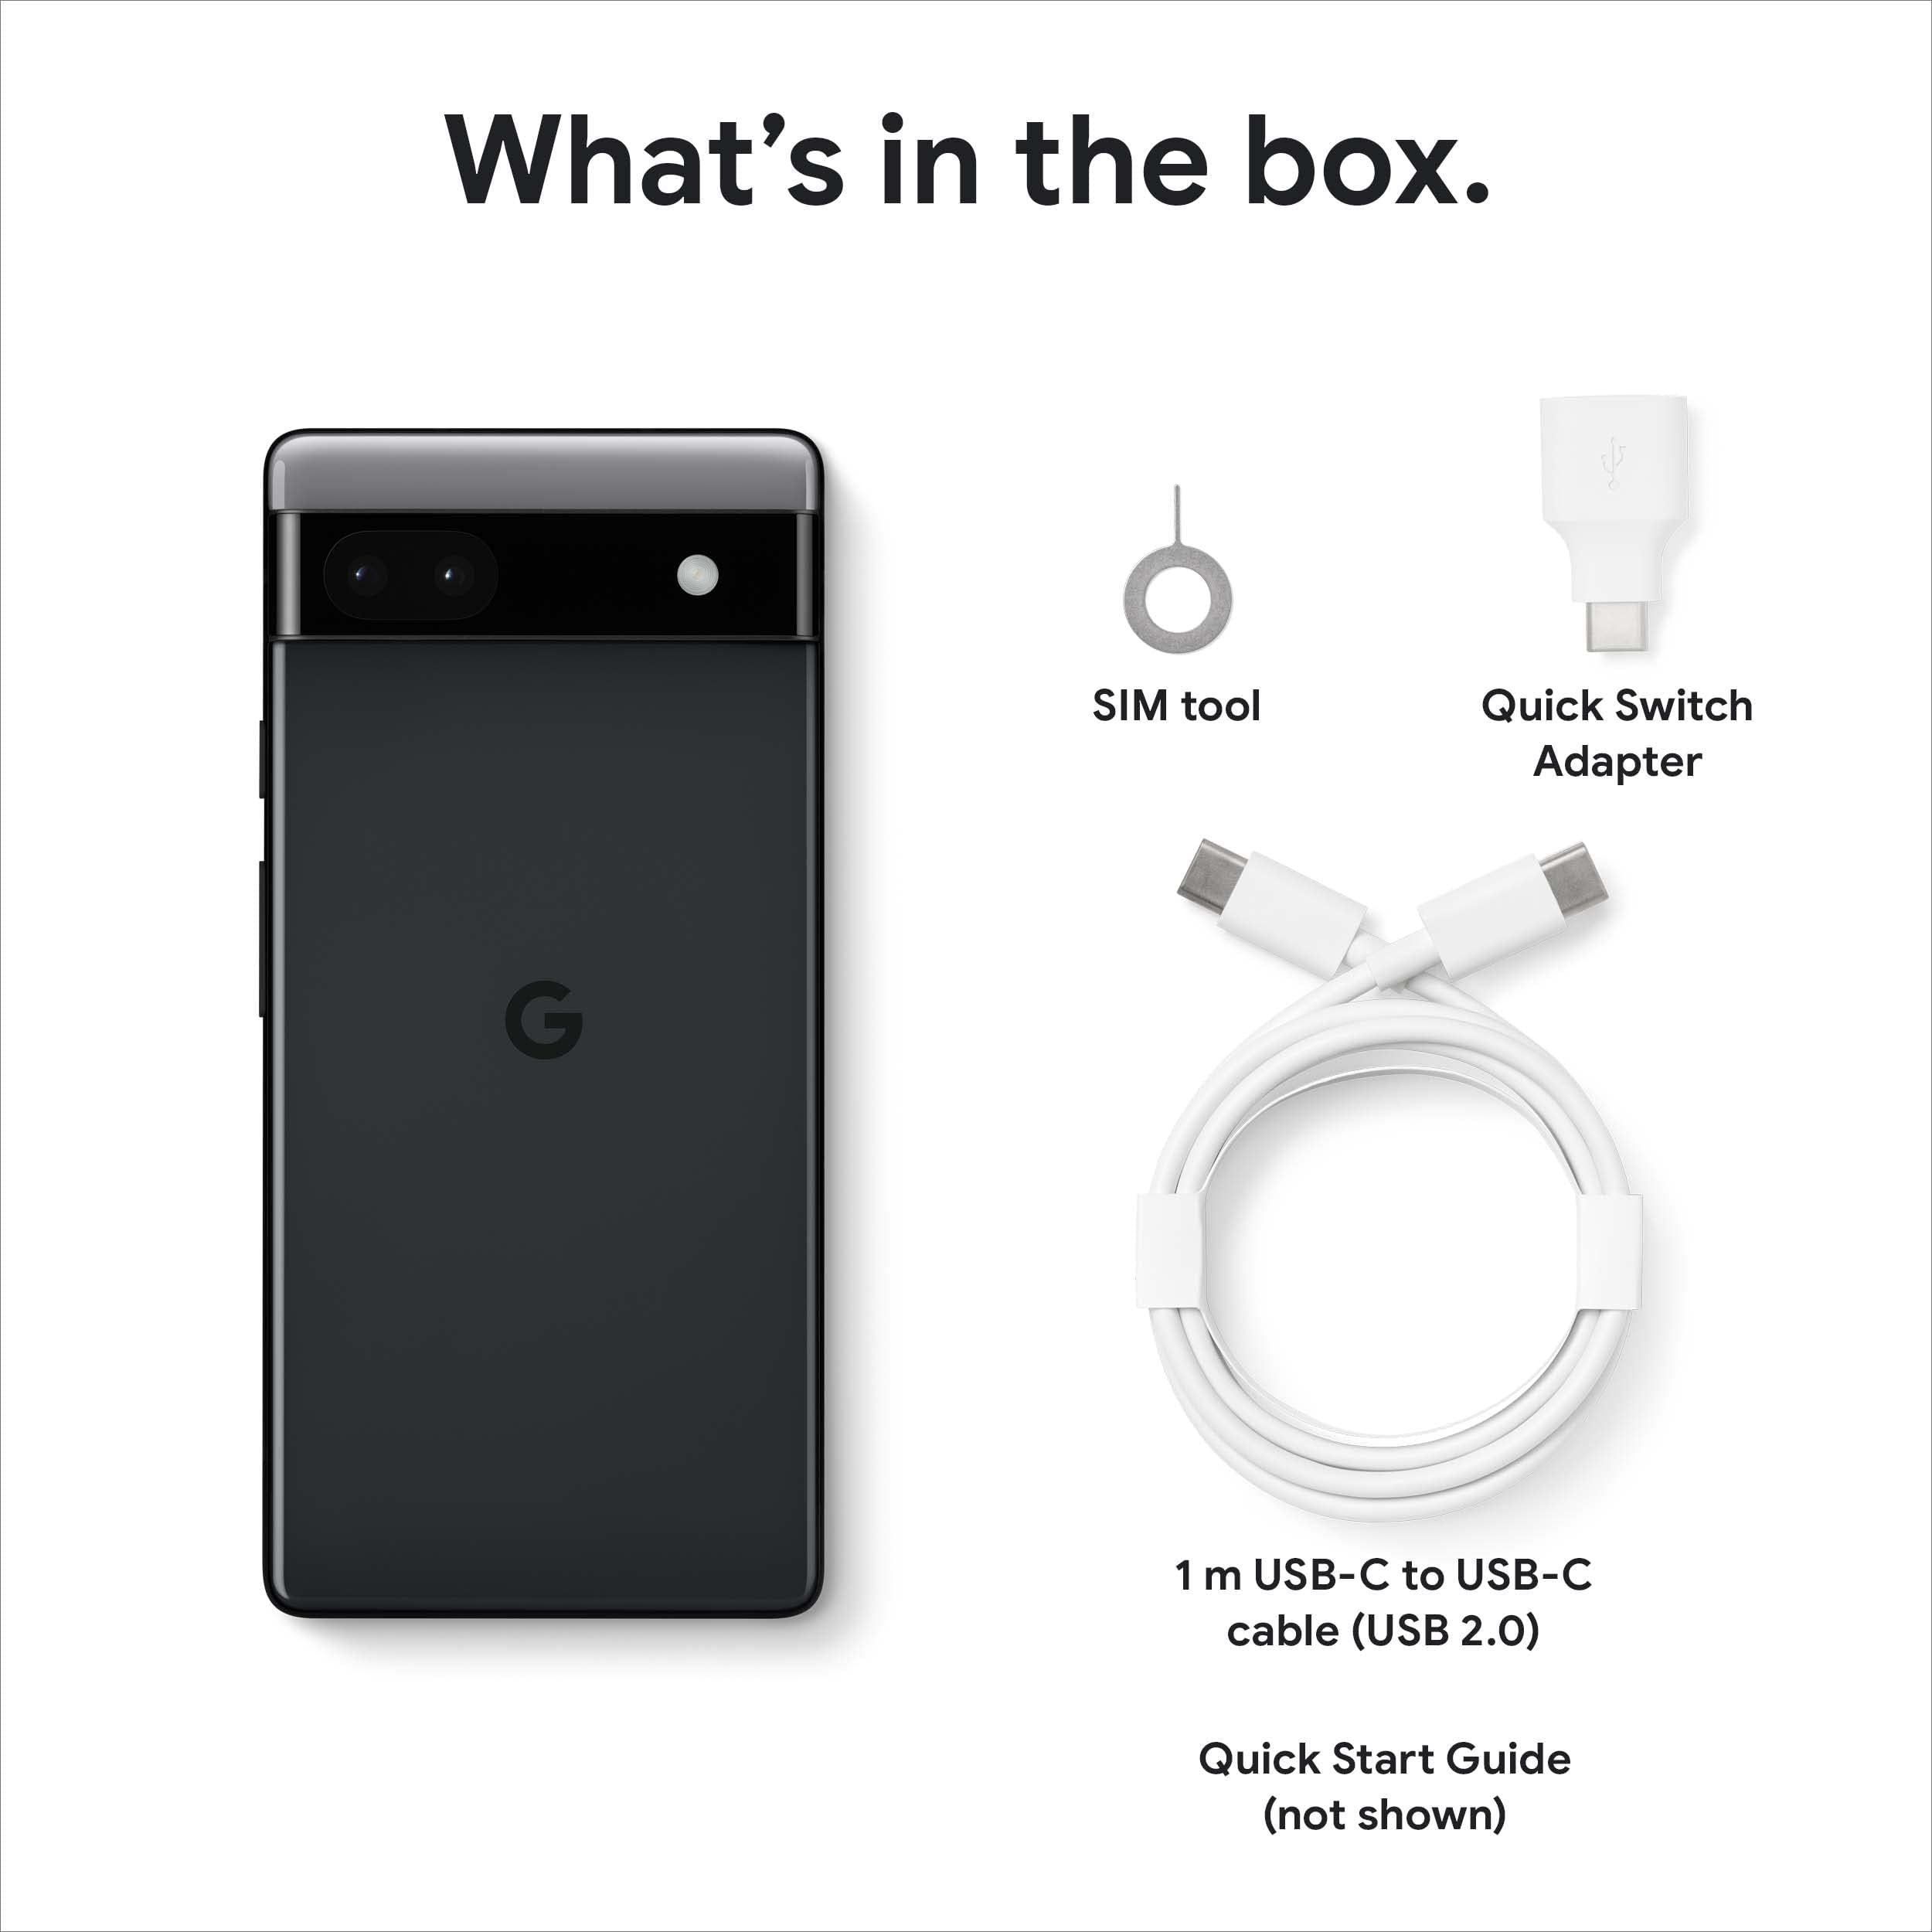 Google Pixel 6a - 5G Android Phone - Unlocked Smartphone with 12 Megapixel Camera and 24-Hour Battery - Charcoal